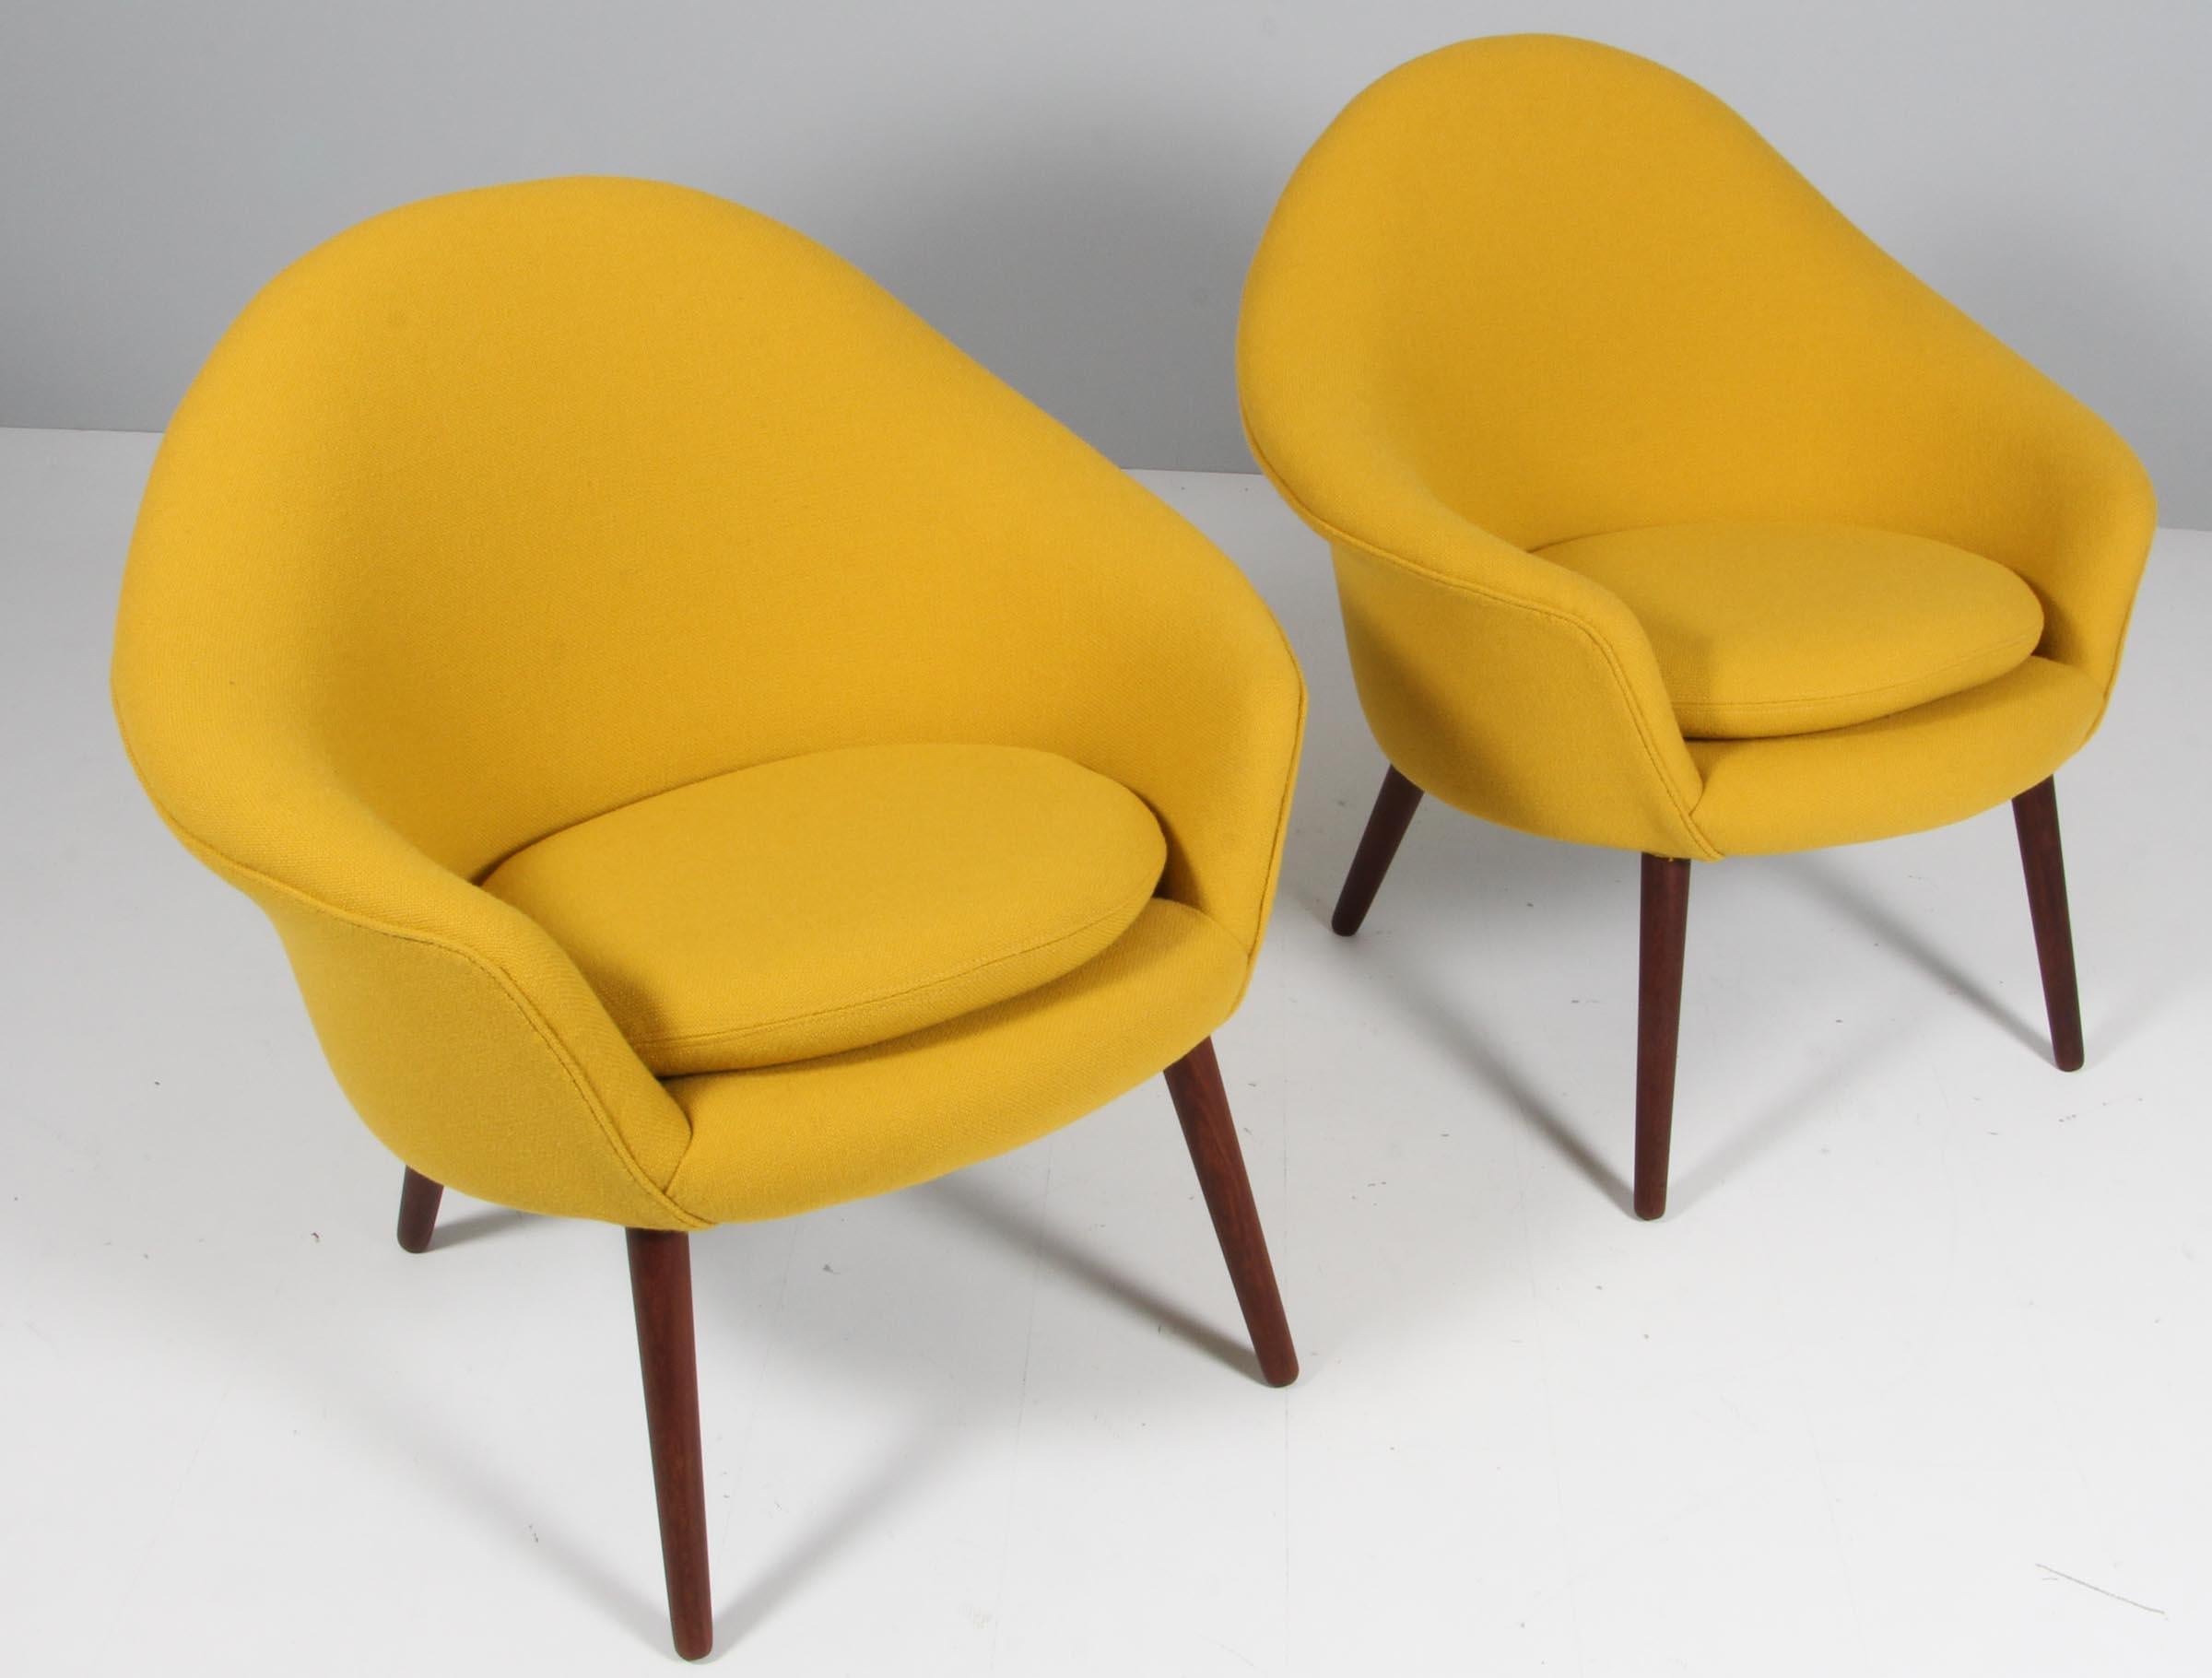 Hans Olsen. Pair of lounge chairs new upholstered with yellow Hallingdal from Kvadrat.

Legs of teak.

Made in the 1960s.

Made by Jørgensen Møbelfabrik, model 187 Cantharel chair.

